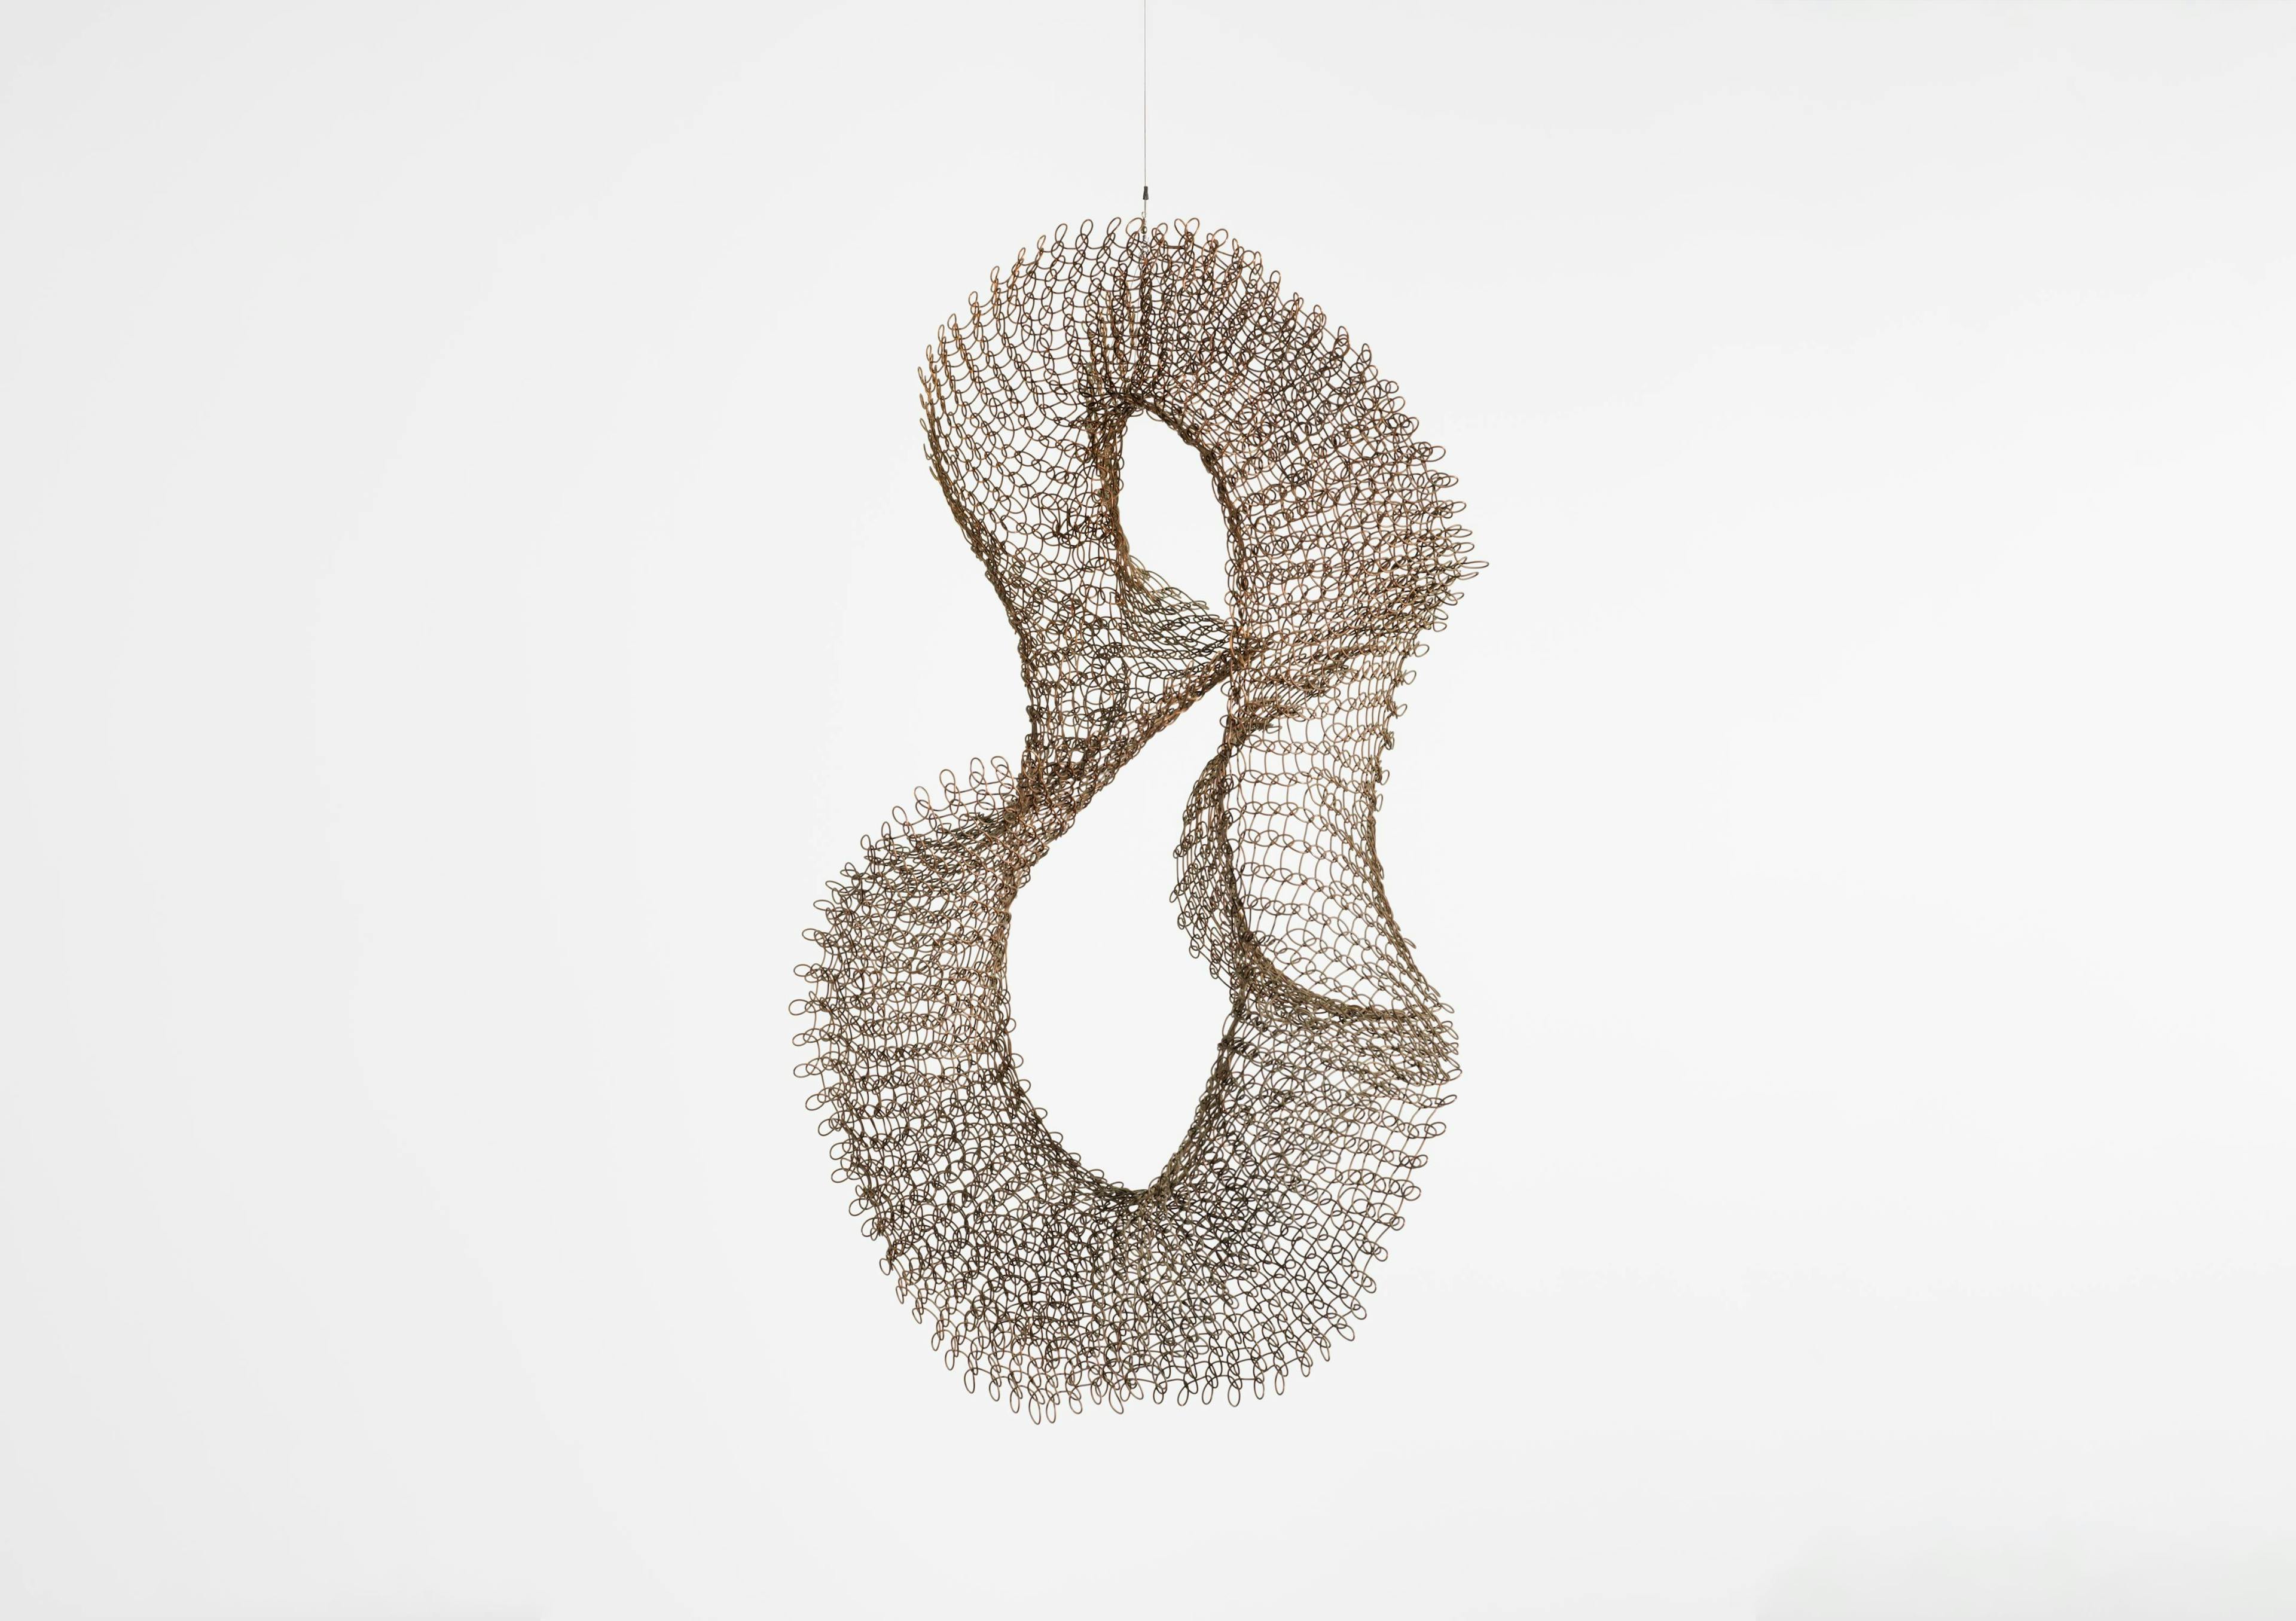 A mixed media artwork by Ruth Asawa, titled Untitled (S.066, Hanging Mobius Strip), circa 1968.